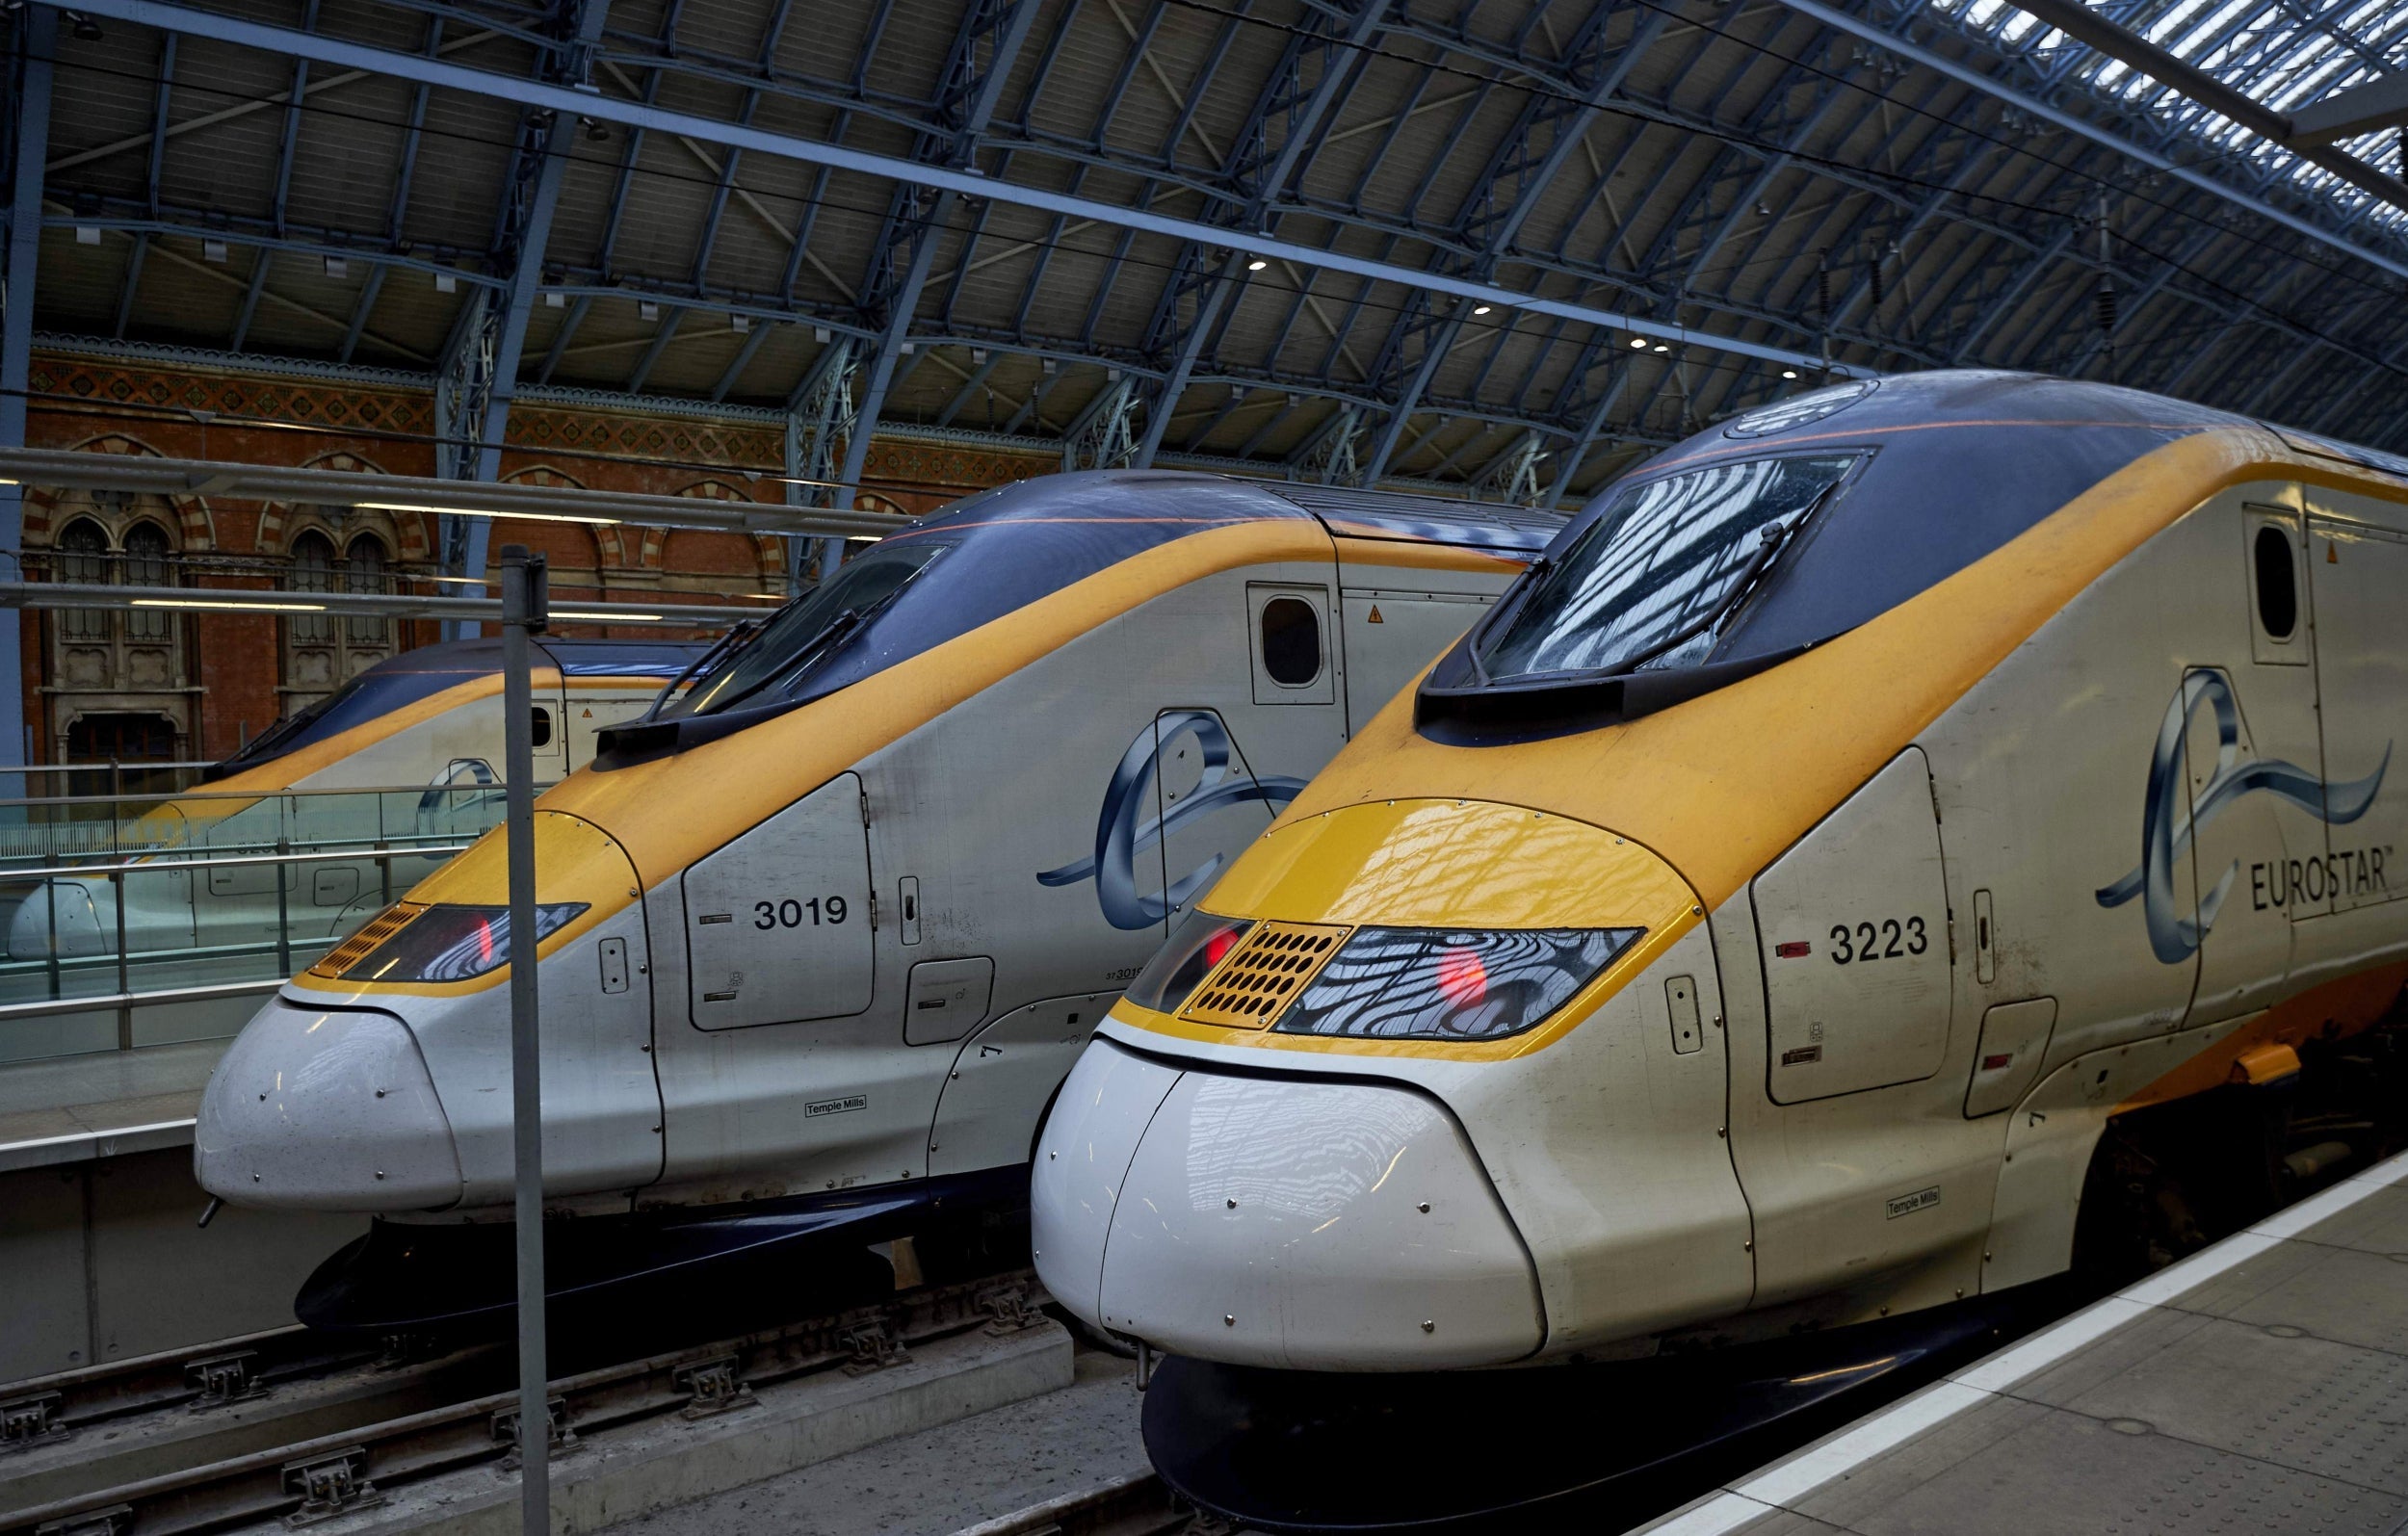 Eurostar fails to back up Transport Secretary's claim that train company is 'fully committed' to expanding international rail routes to 'Spain, Portugal, Geneva and beyond'